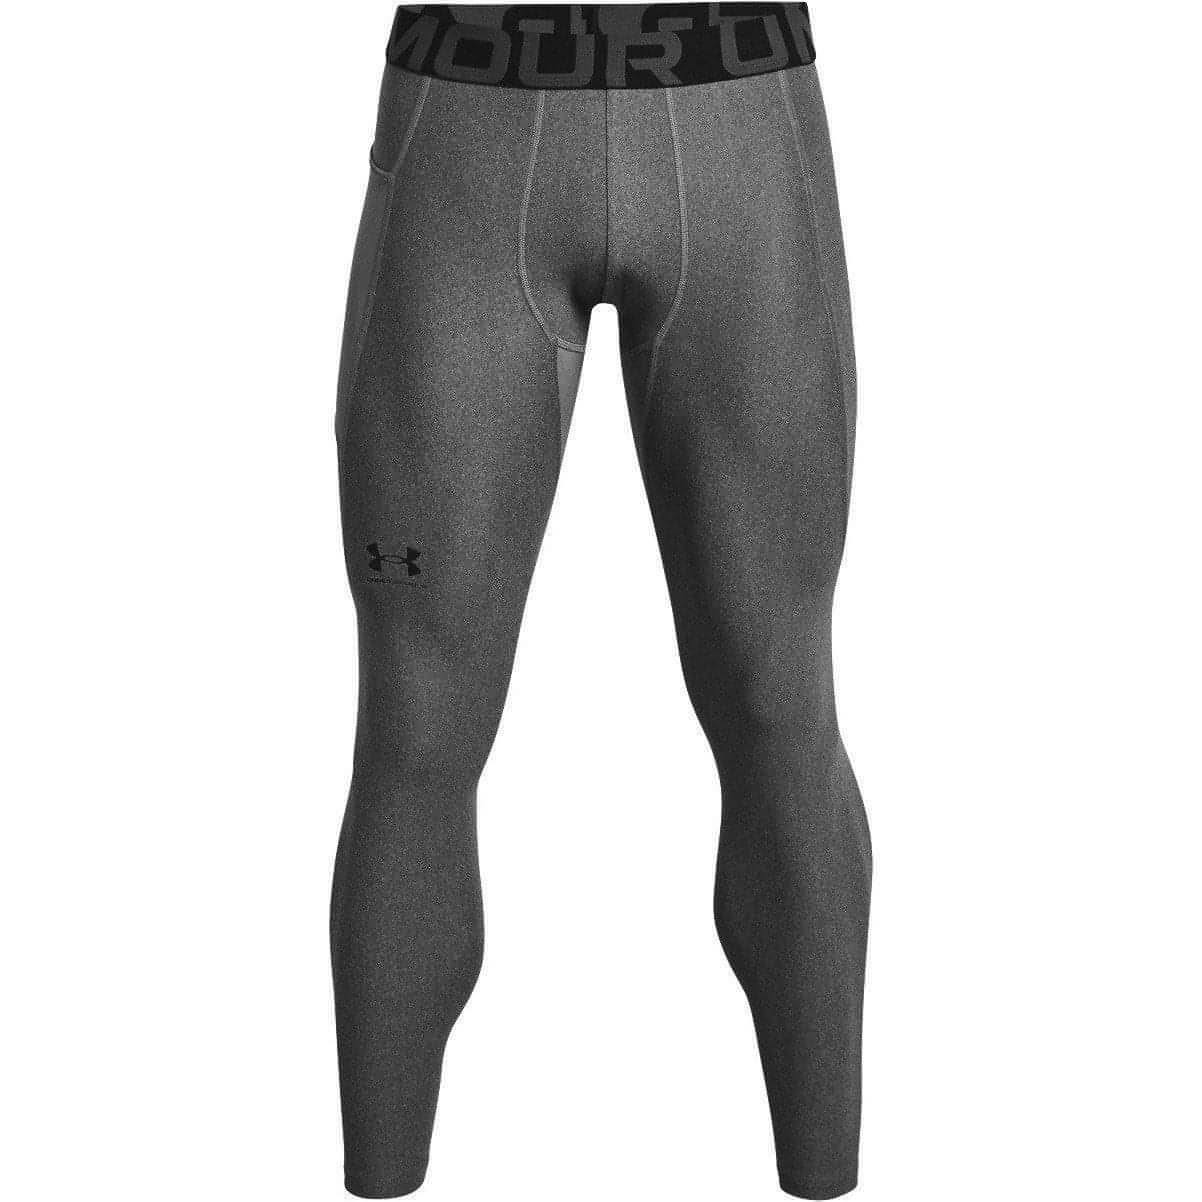 Under Armour HeatGear Mens Long Compression Tights - Grey - Start Fitness